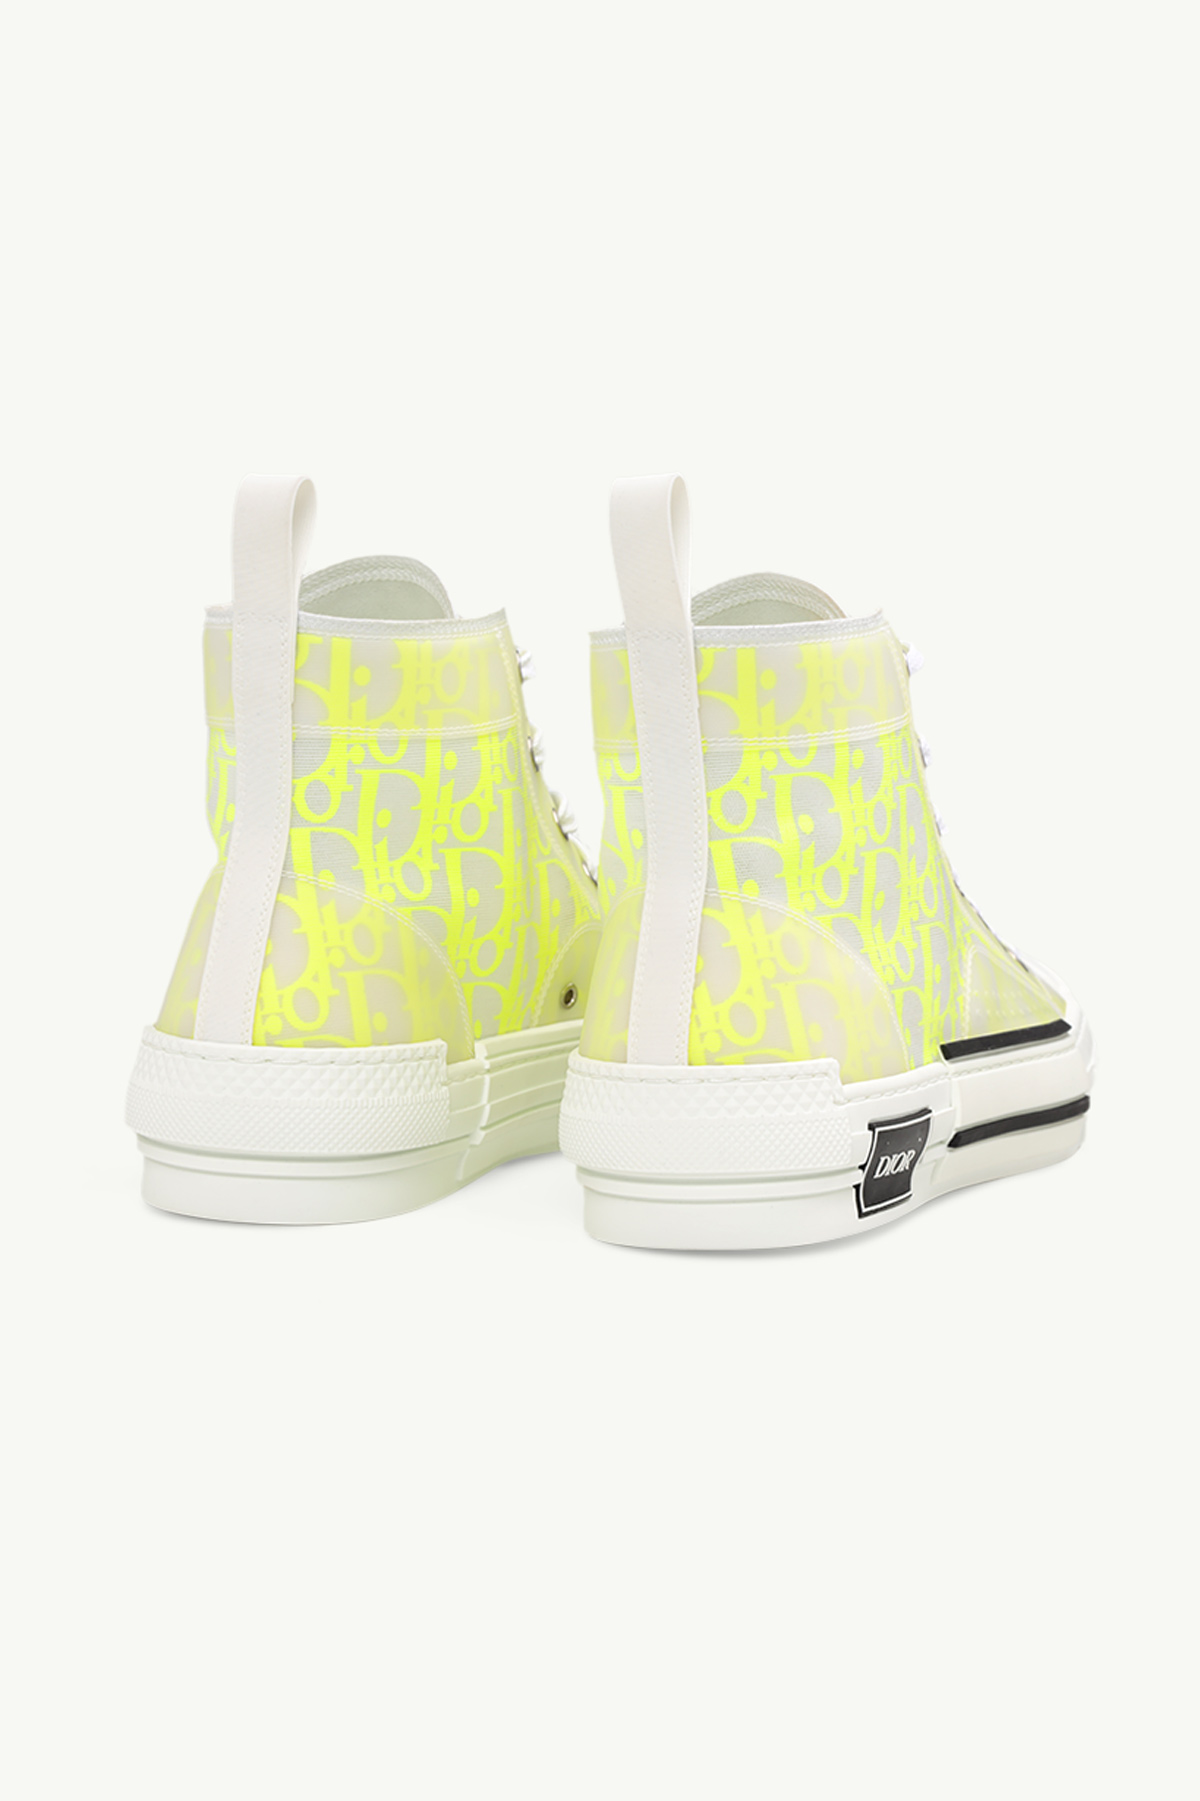 CHRISTIAN DIOR B23 Oblique High Top Sneakers in White/Yellow 2